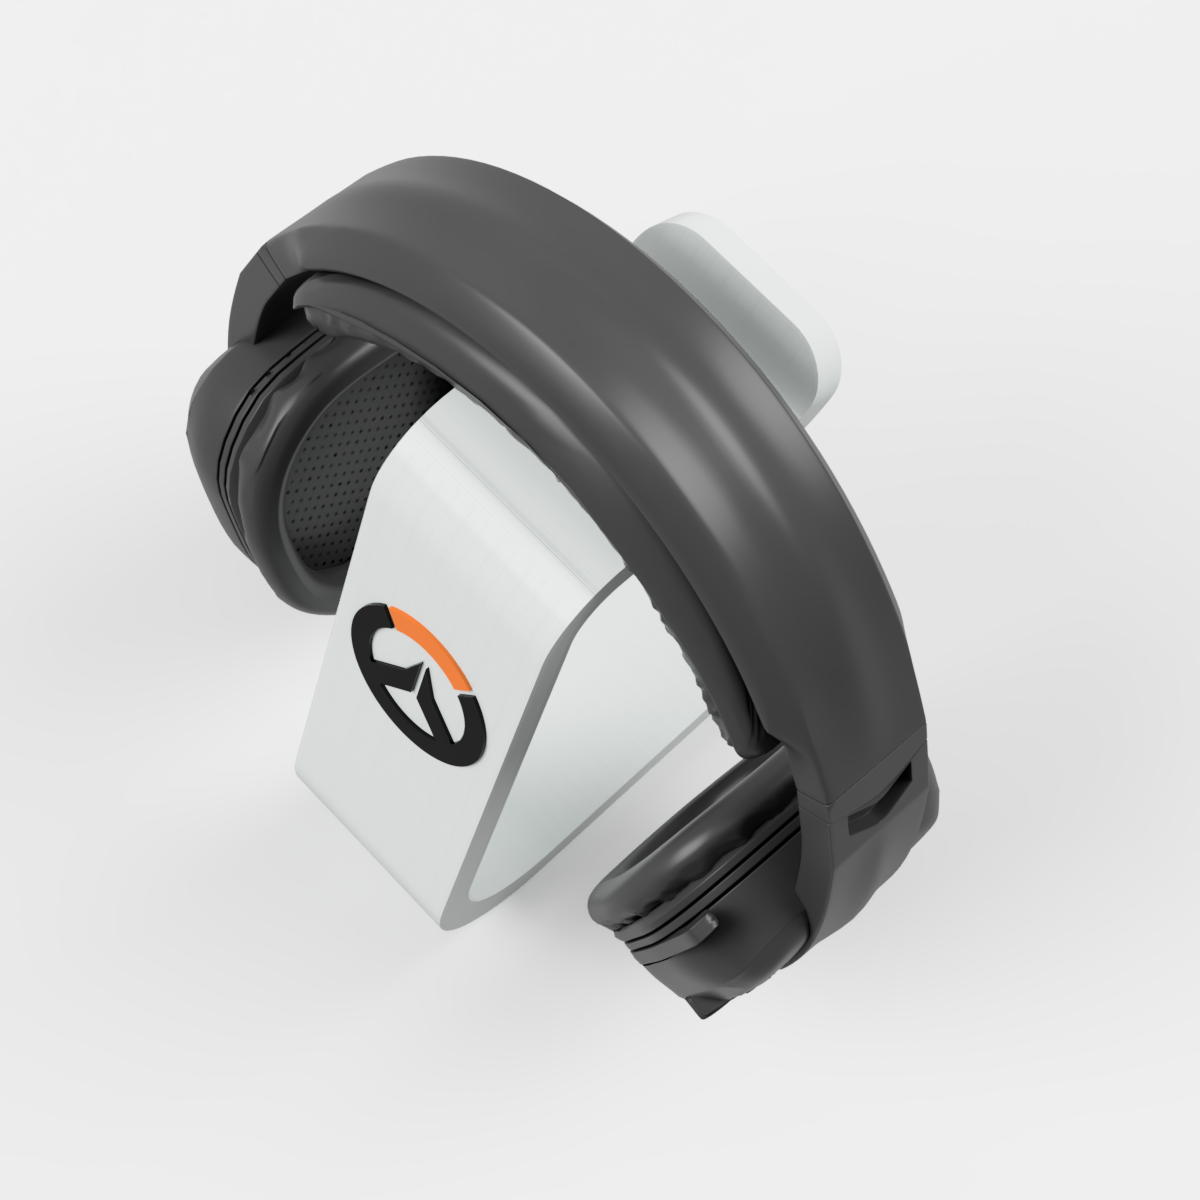 Suporte_headphone_mesa_2018-Oct-09_05-16-25PM-000_CustomizedView2875928780_png.png Download STL file Support Headset Overwatch 2 • 3D print model, Geandro_Valcorte